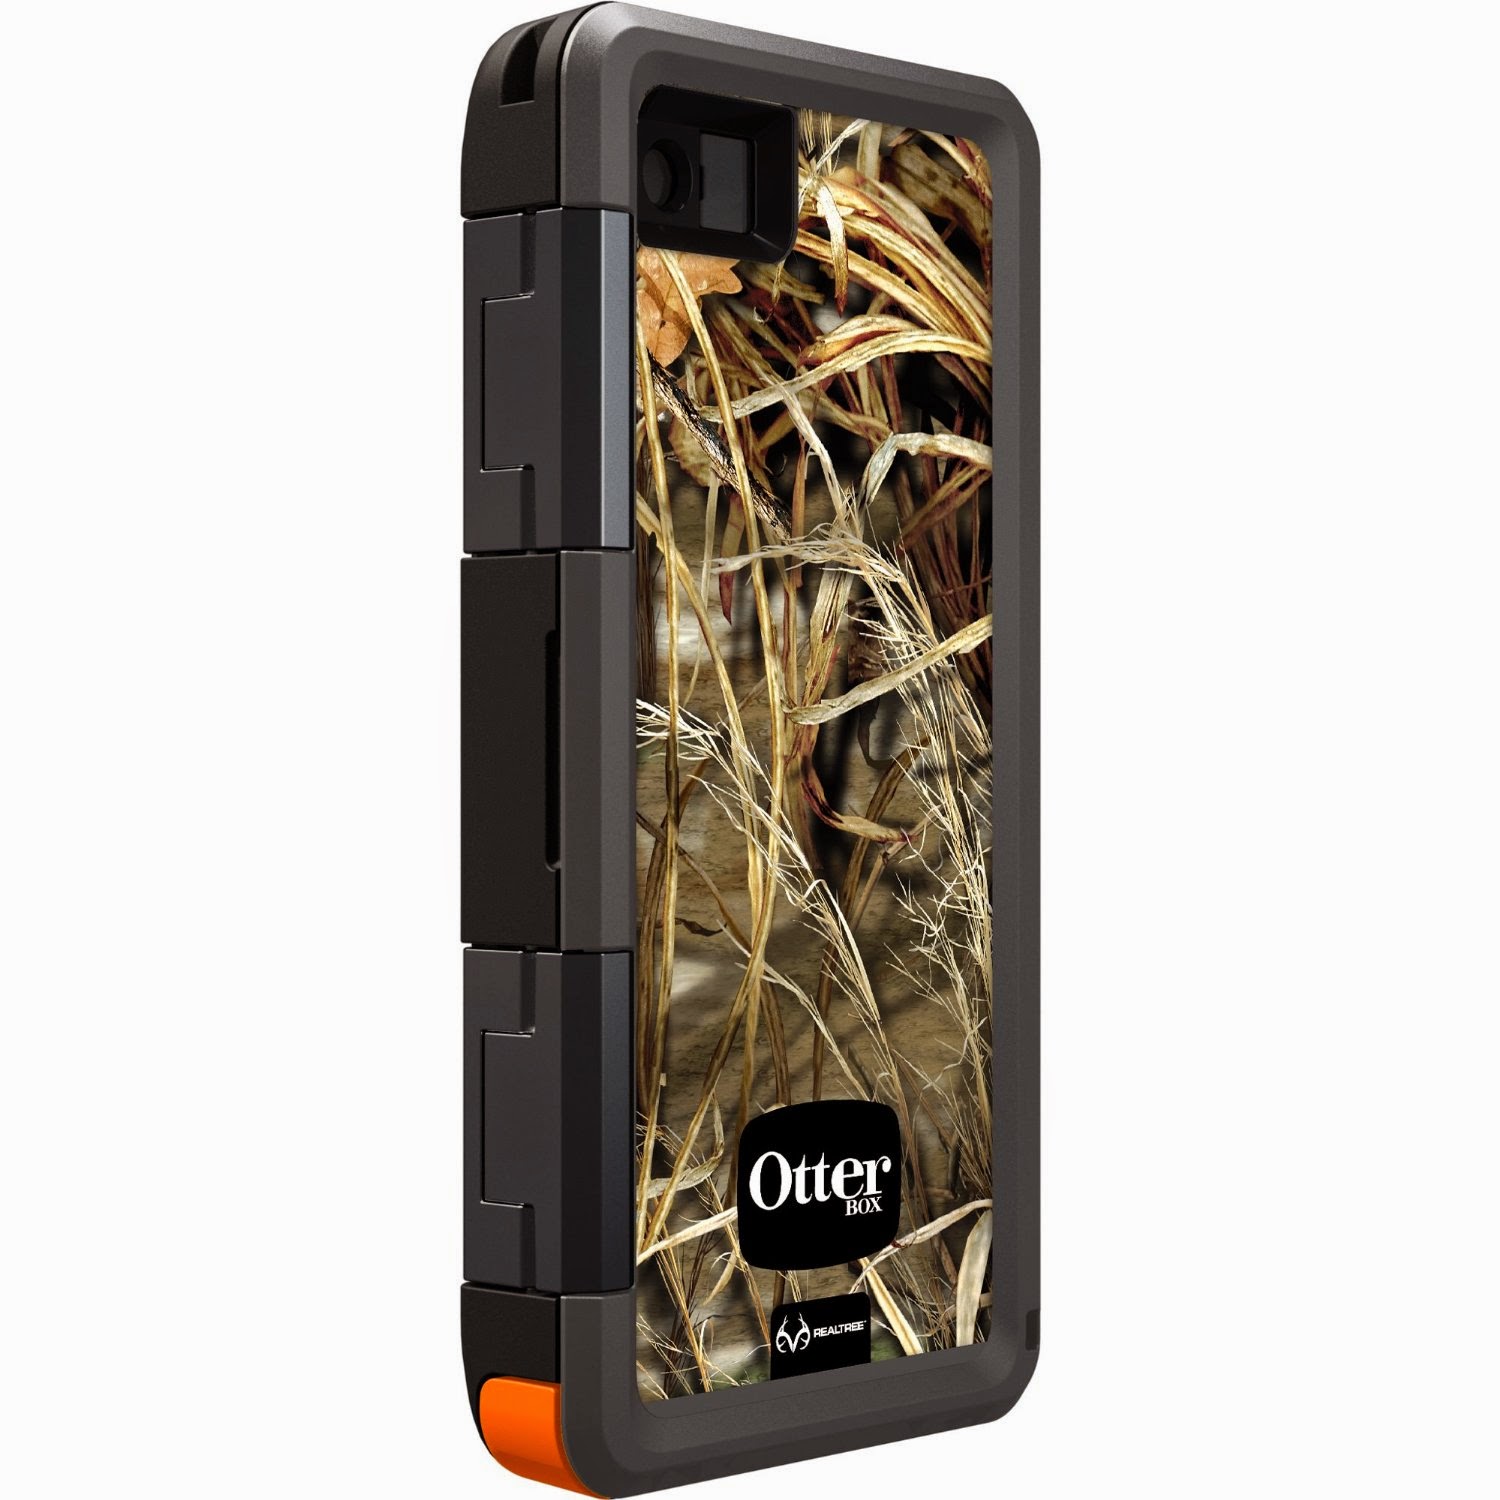 OtterBox Armor Series Waterproof Case for iPhone 5 - Back Side